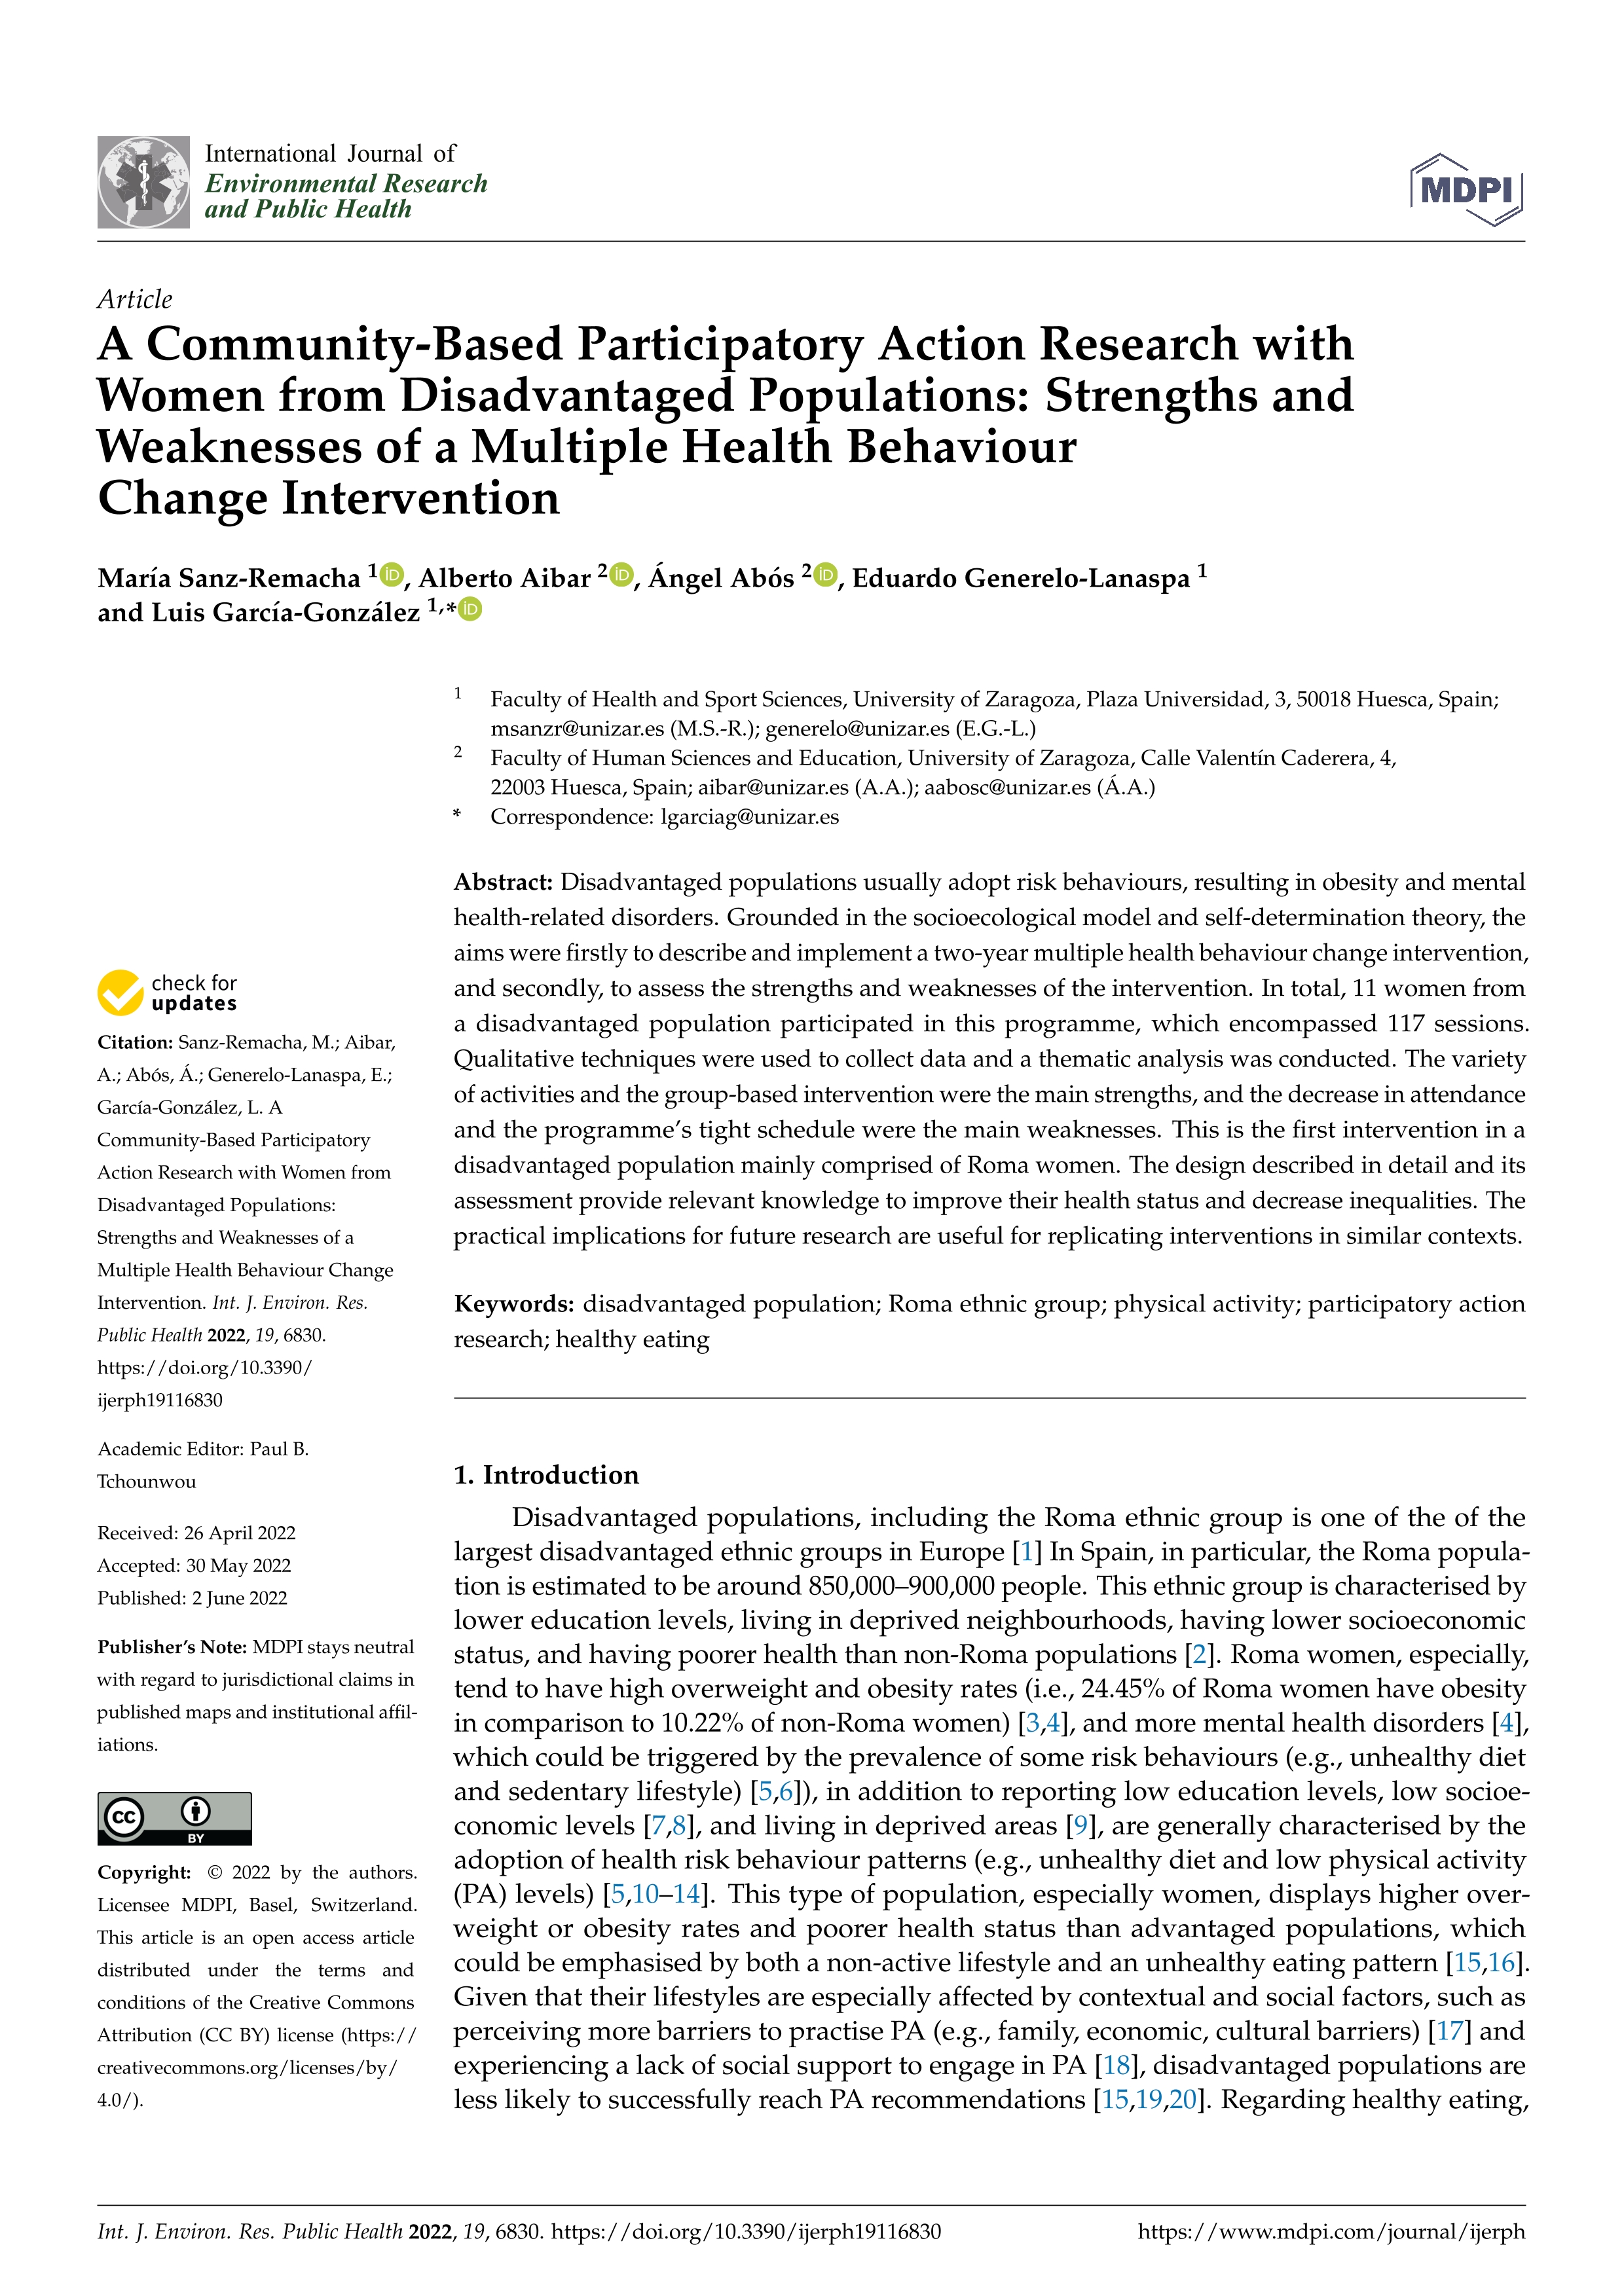 A Community-Based Participatory Action Research with Women from Disadvantaged Populations: Strengths and Weaknesses of a Multiple Health Behaviour Change Intervention; 35682413